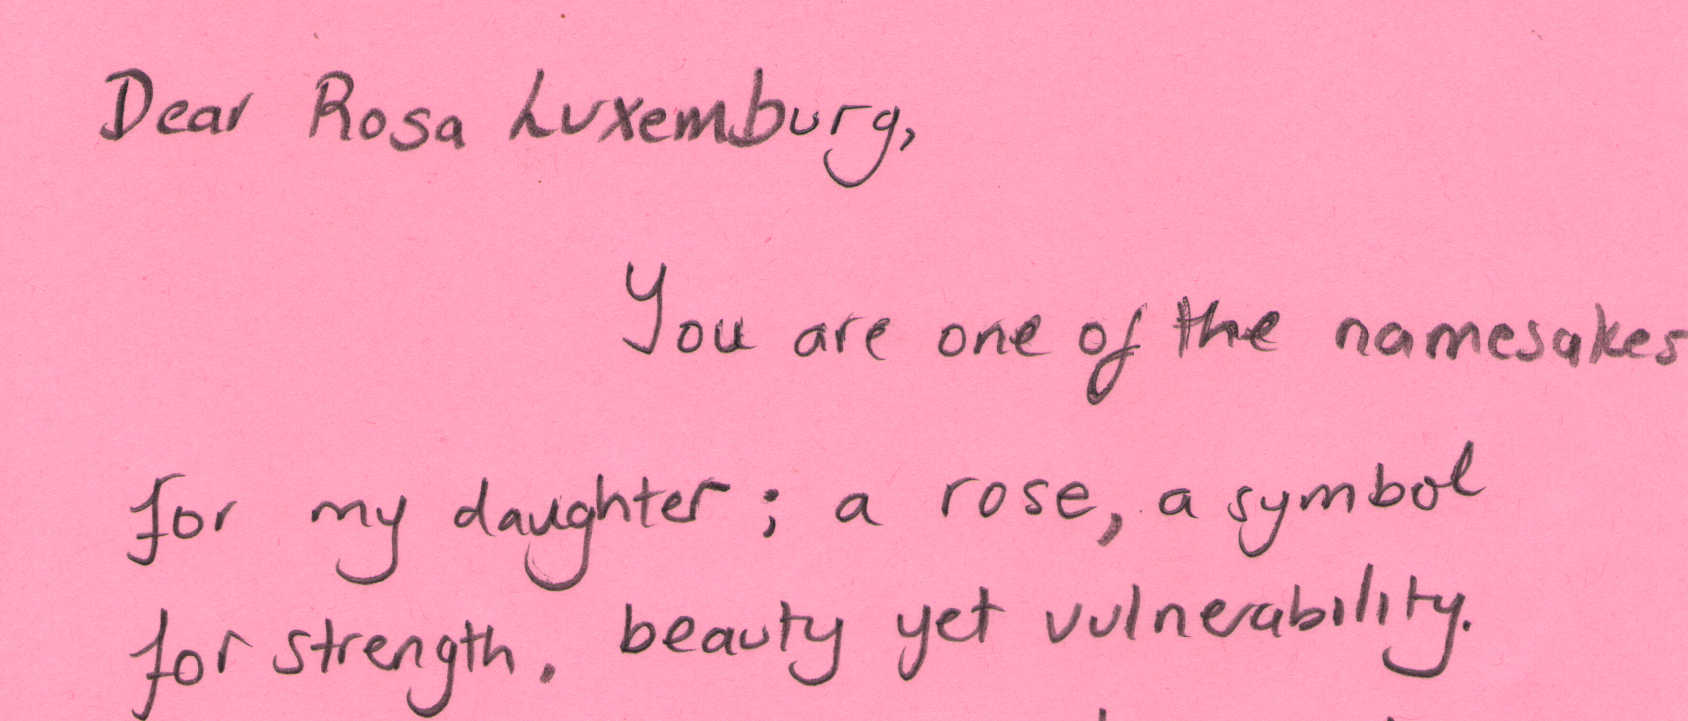 Letter to Rosa Luxemburg from Katherine Rogers